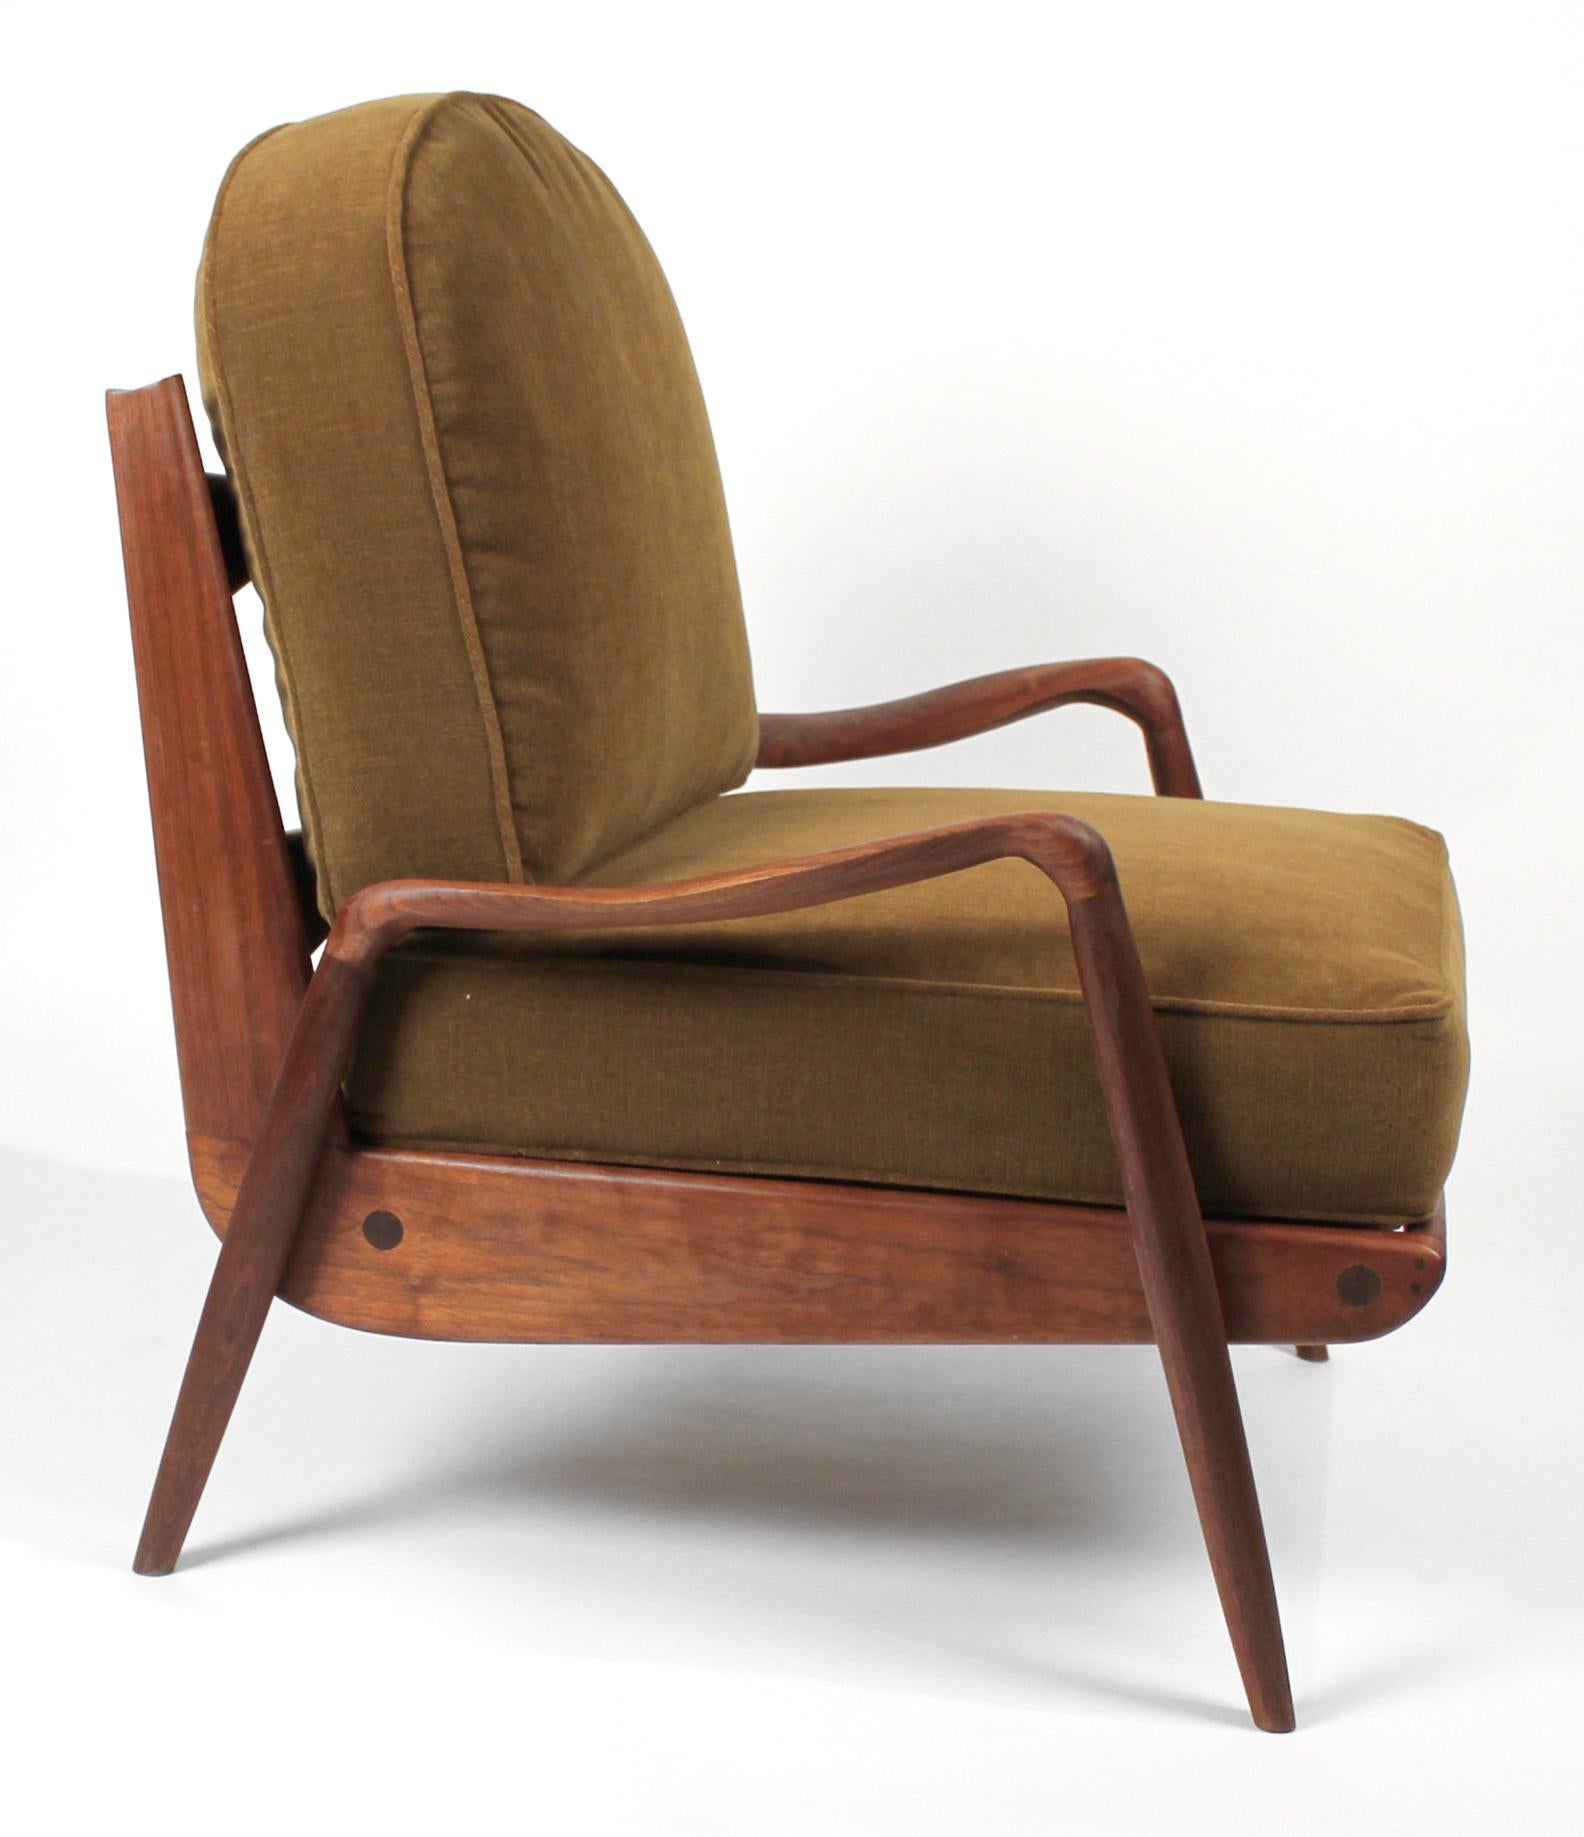 One of the last few chairs produced by Phillip Lloyd Powell in his New Hope Studio before he passed. This example is well crafted and has beautiful graining to the wood. The foam is new and the velvet upholstery is very complementary to the frame.